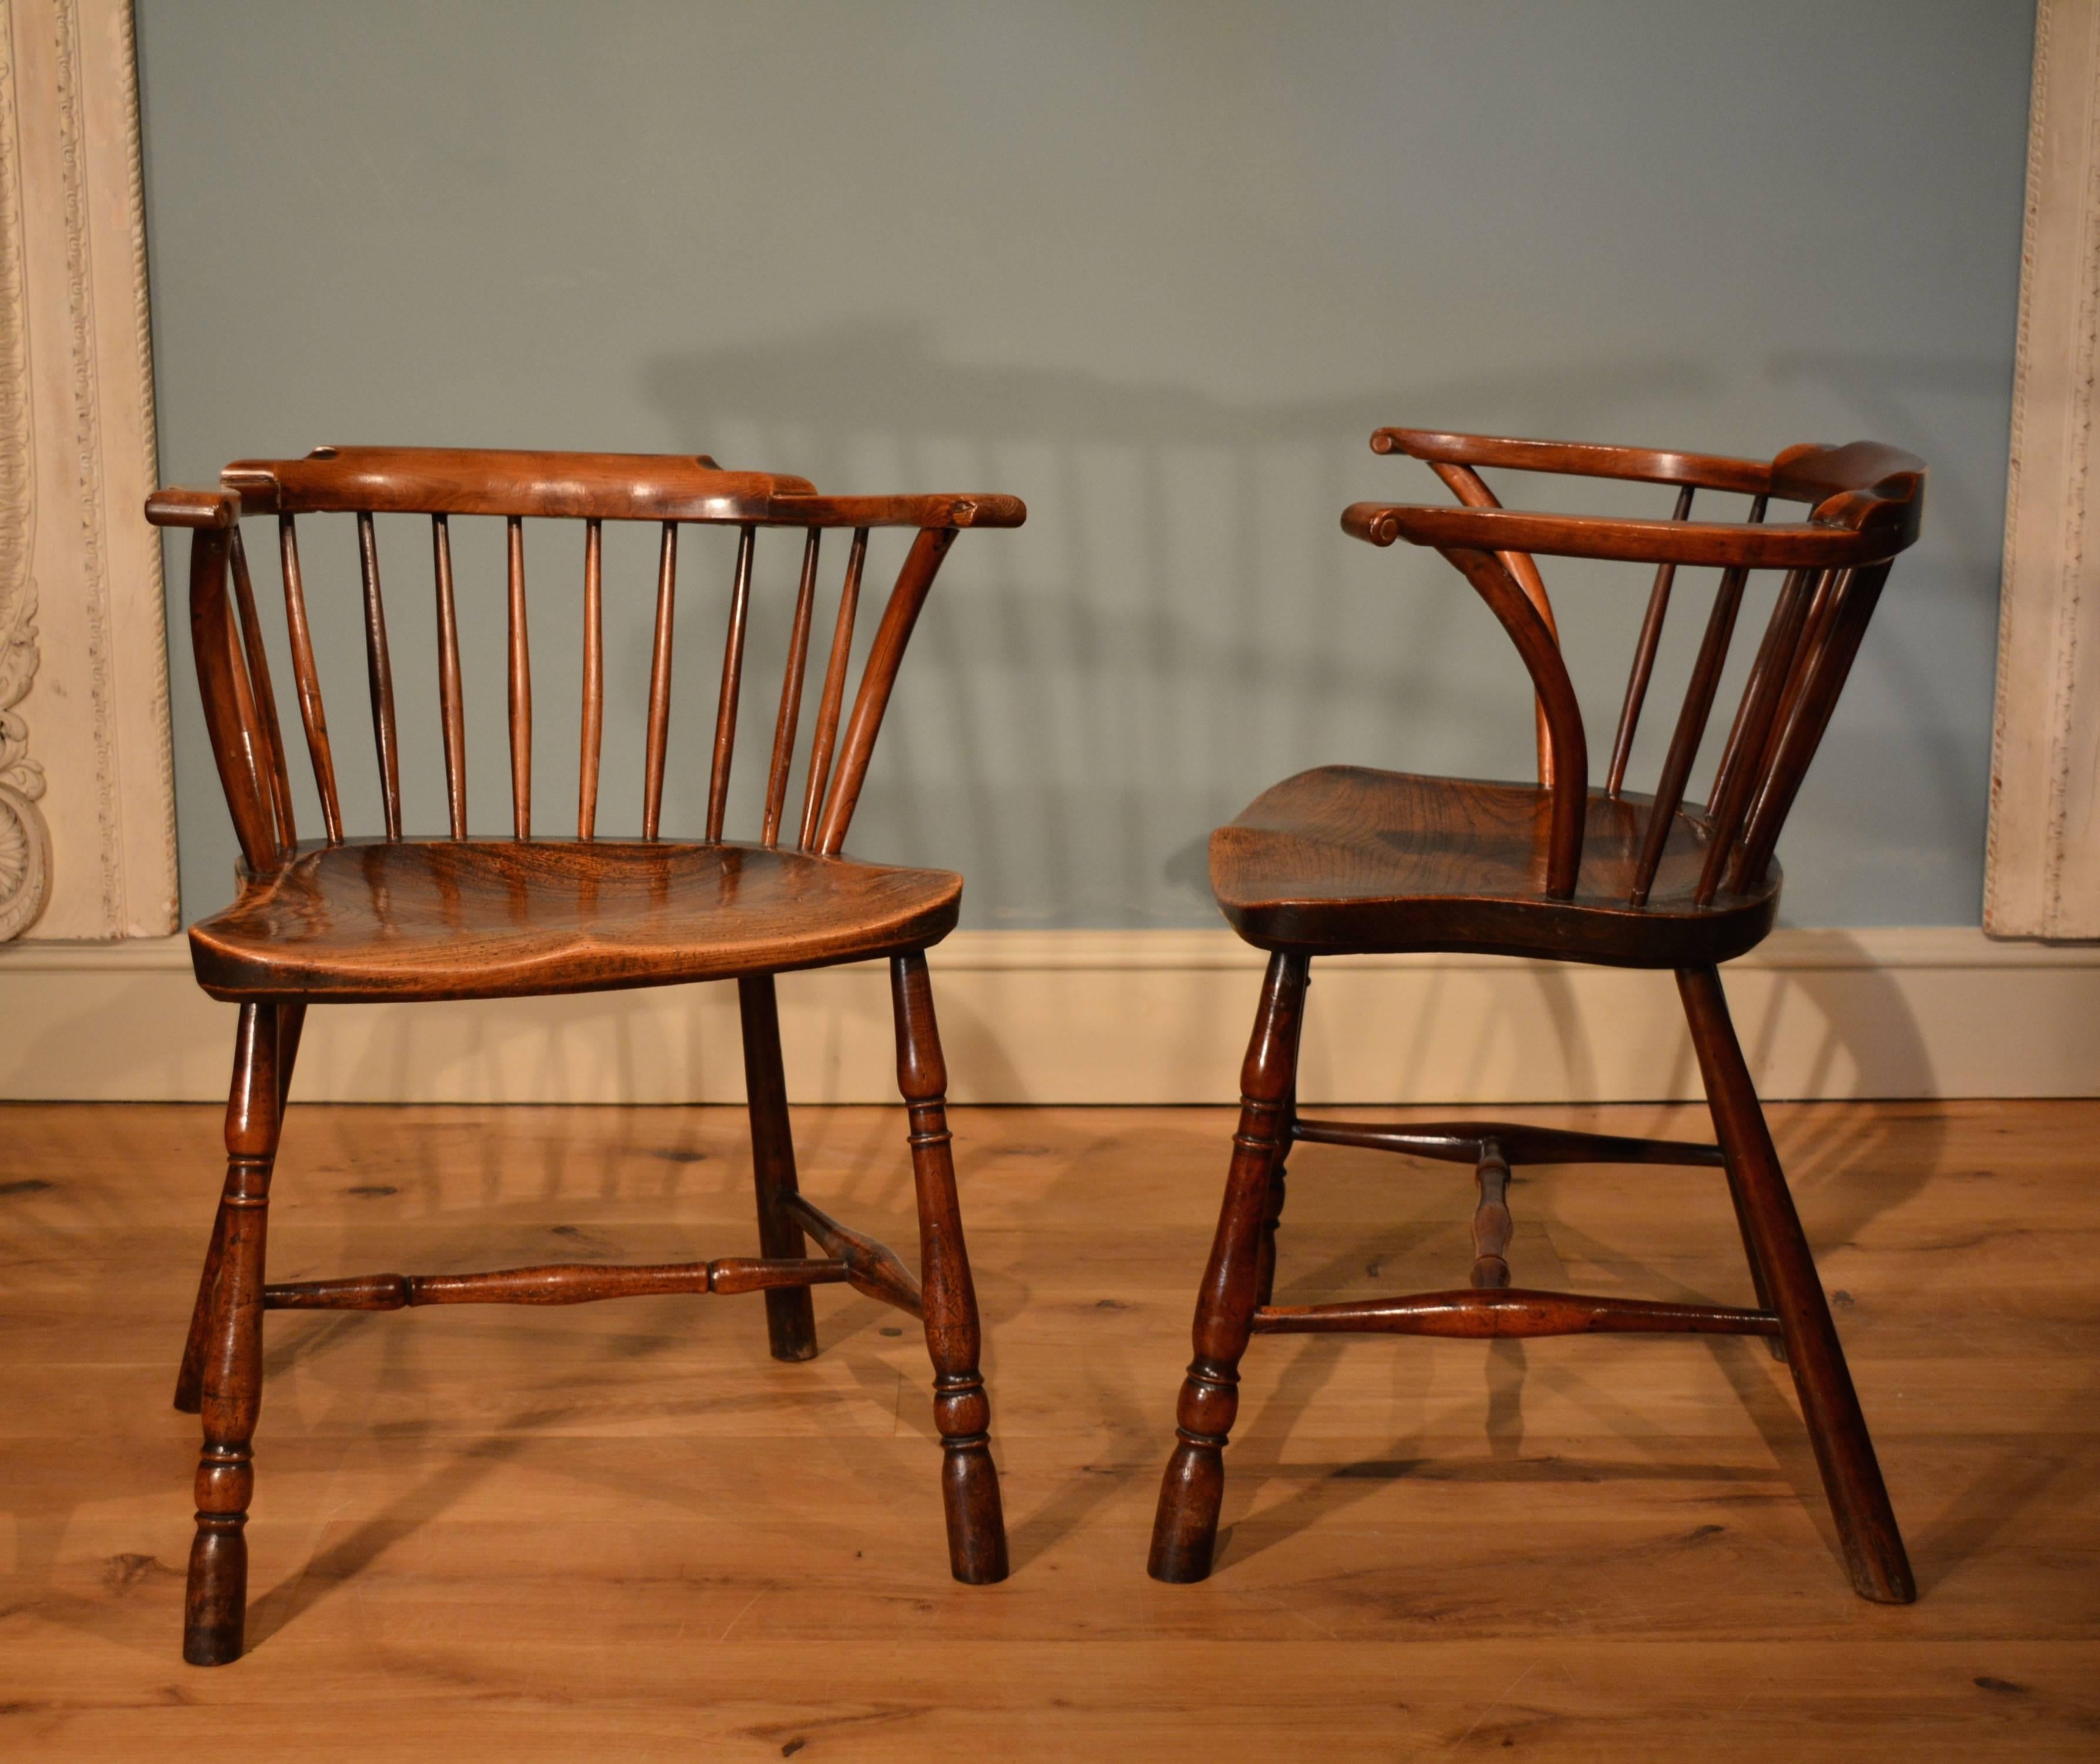 A rare pair of low back yew wood 'library chairs' having elm seats standing on turned legs with turned stretchers.